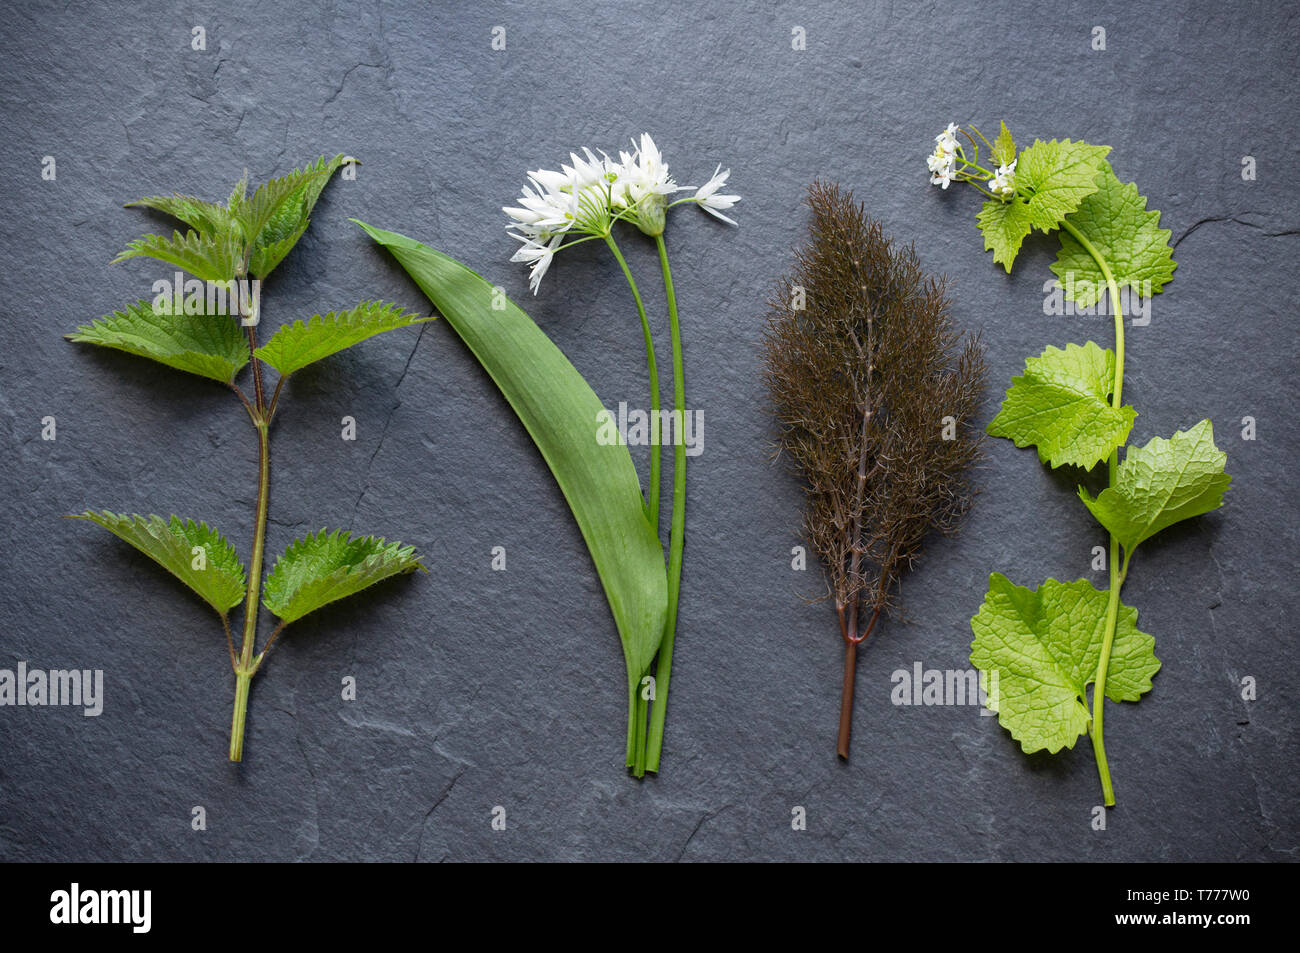 Wild, edible plants picked in May to add to various recipes. Left-right: Common stinging nettle, Urtica dioica, wild garlic, Allium ursinum, bronze fe Stock Photo